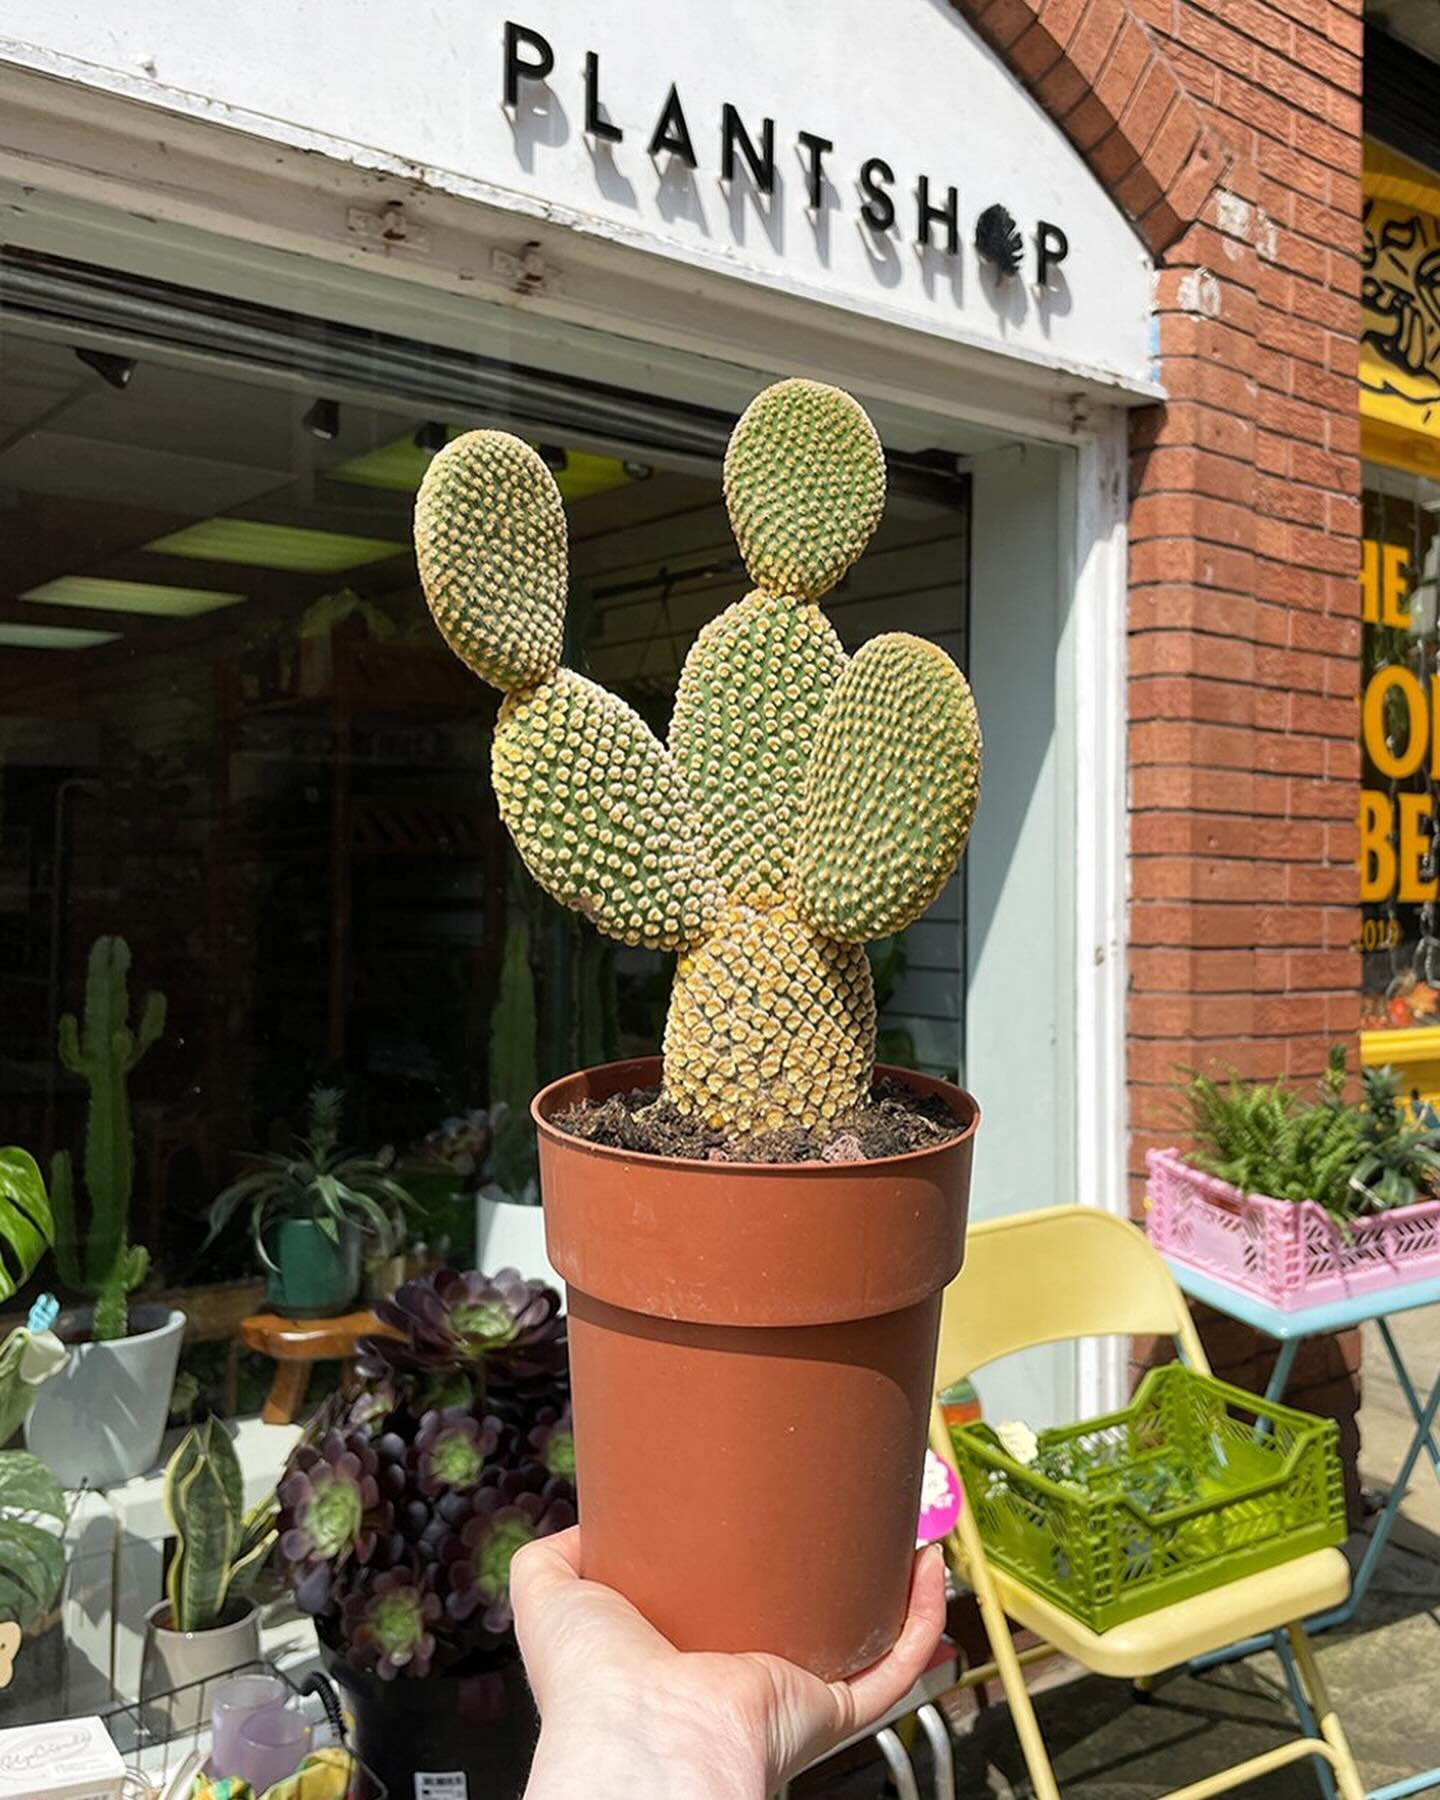 Known formally as Opuntia Microdasys, the Bunny Ear Cactus would be a striking piece on any windowsill, and is rather easy to care for! It has rounded, green spined pads that grow on top of one another. This large specimen is ideal for making a state